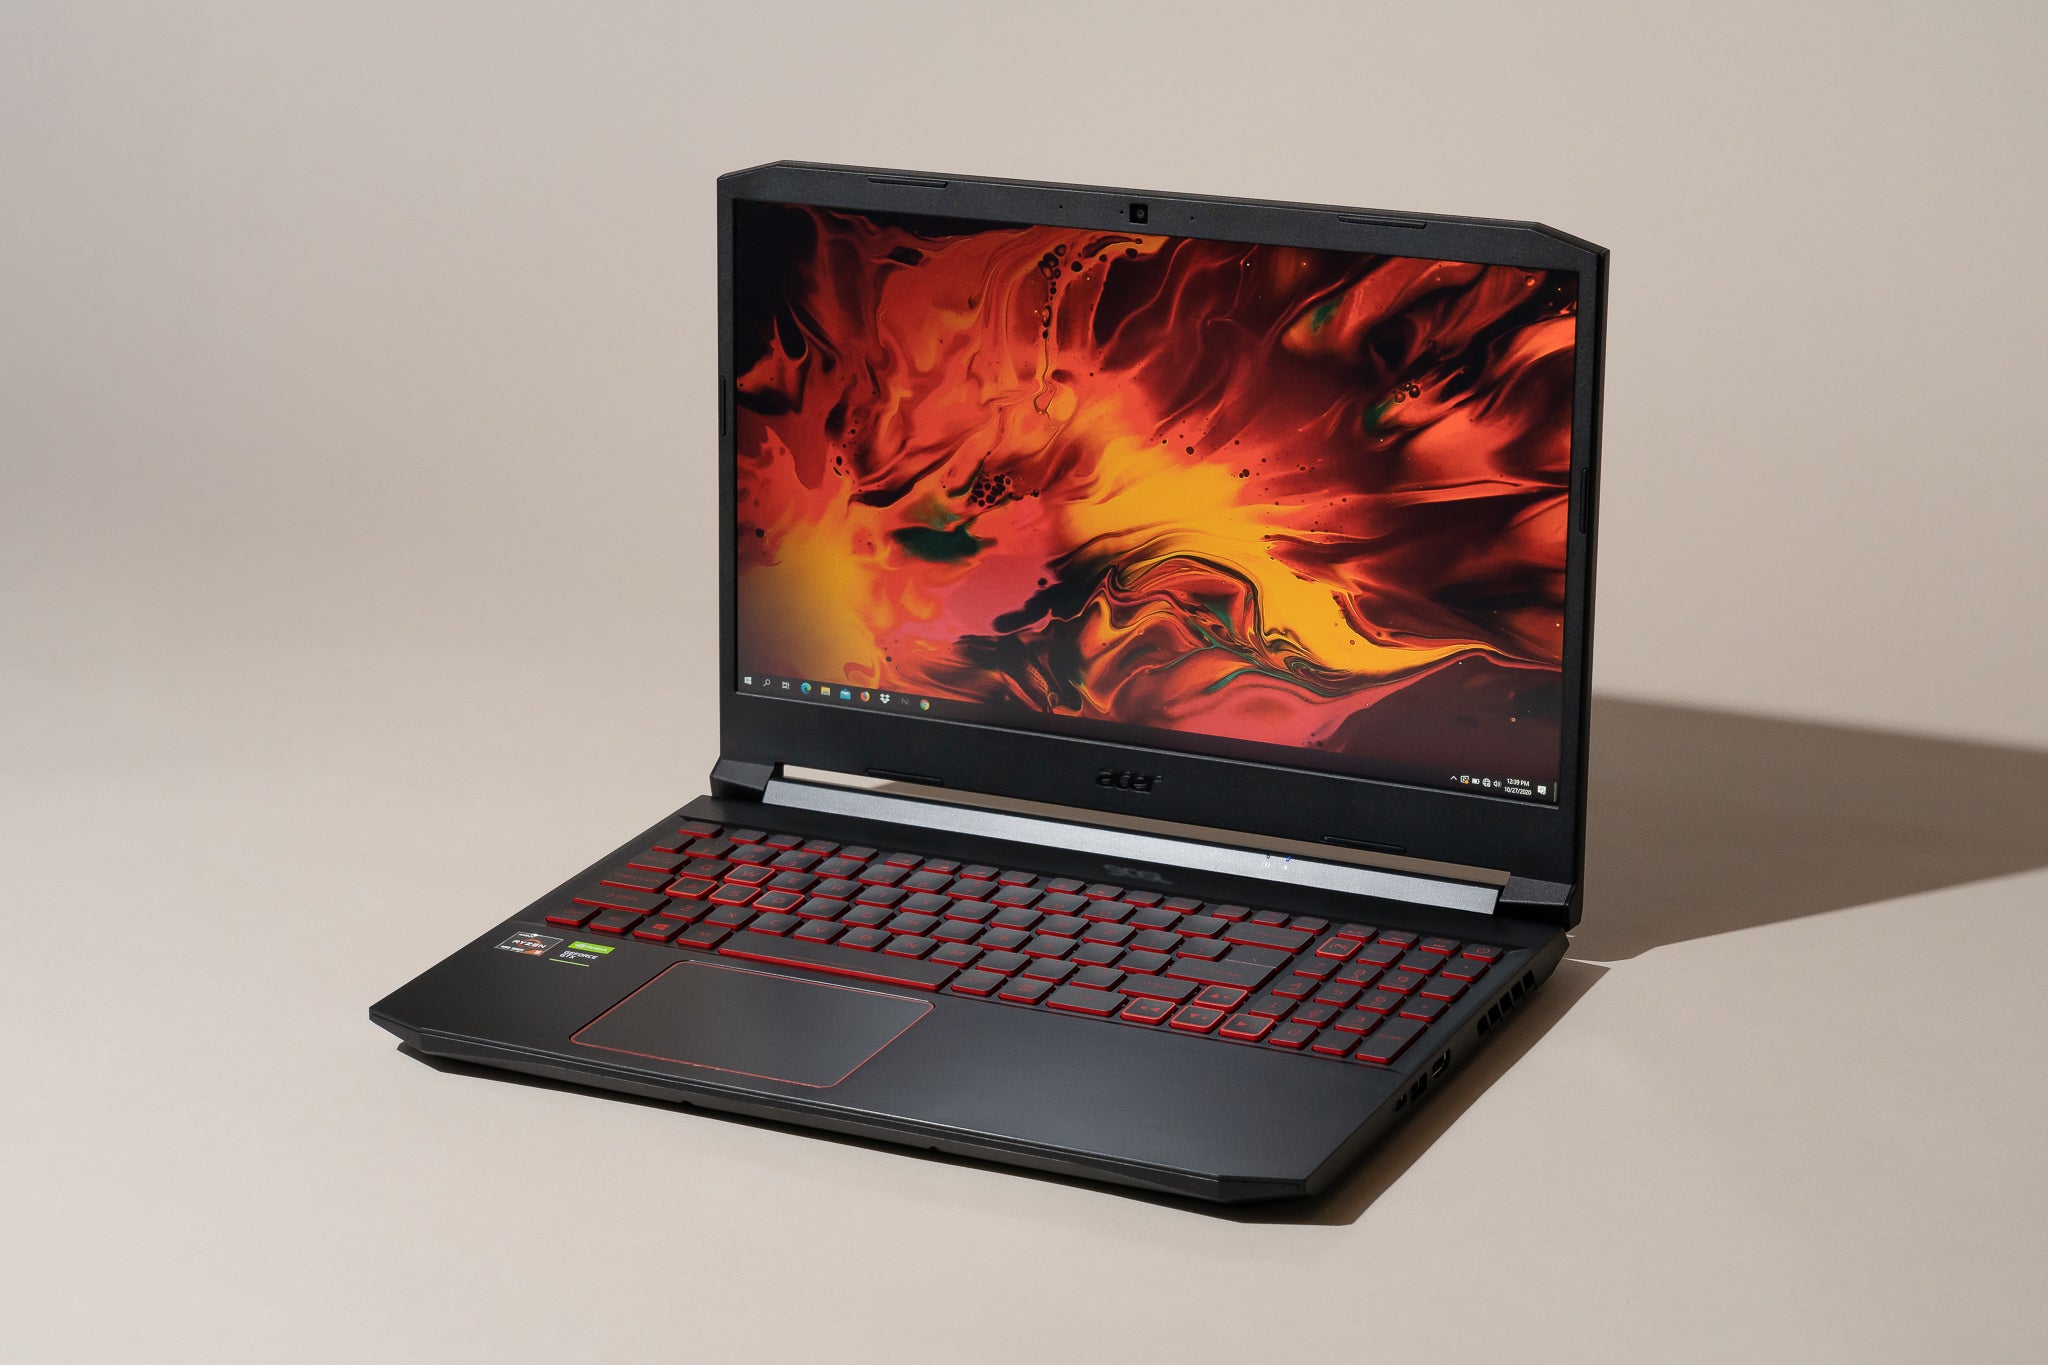 ASUS ROG: A Gaming Laptop Brand Worth Checking Out